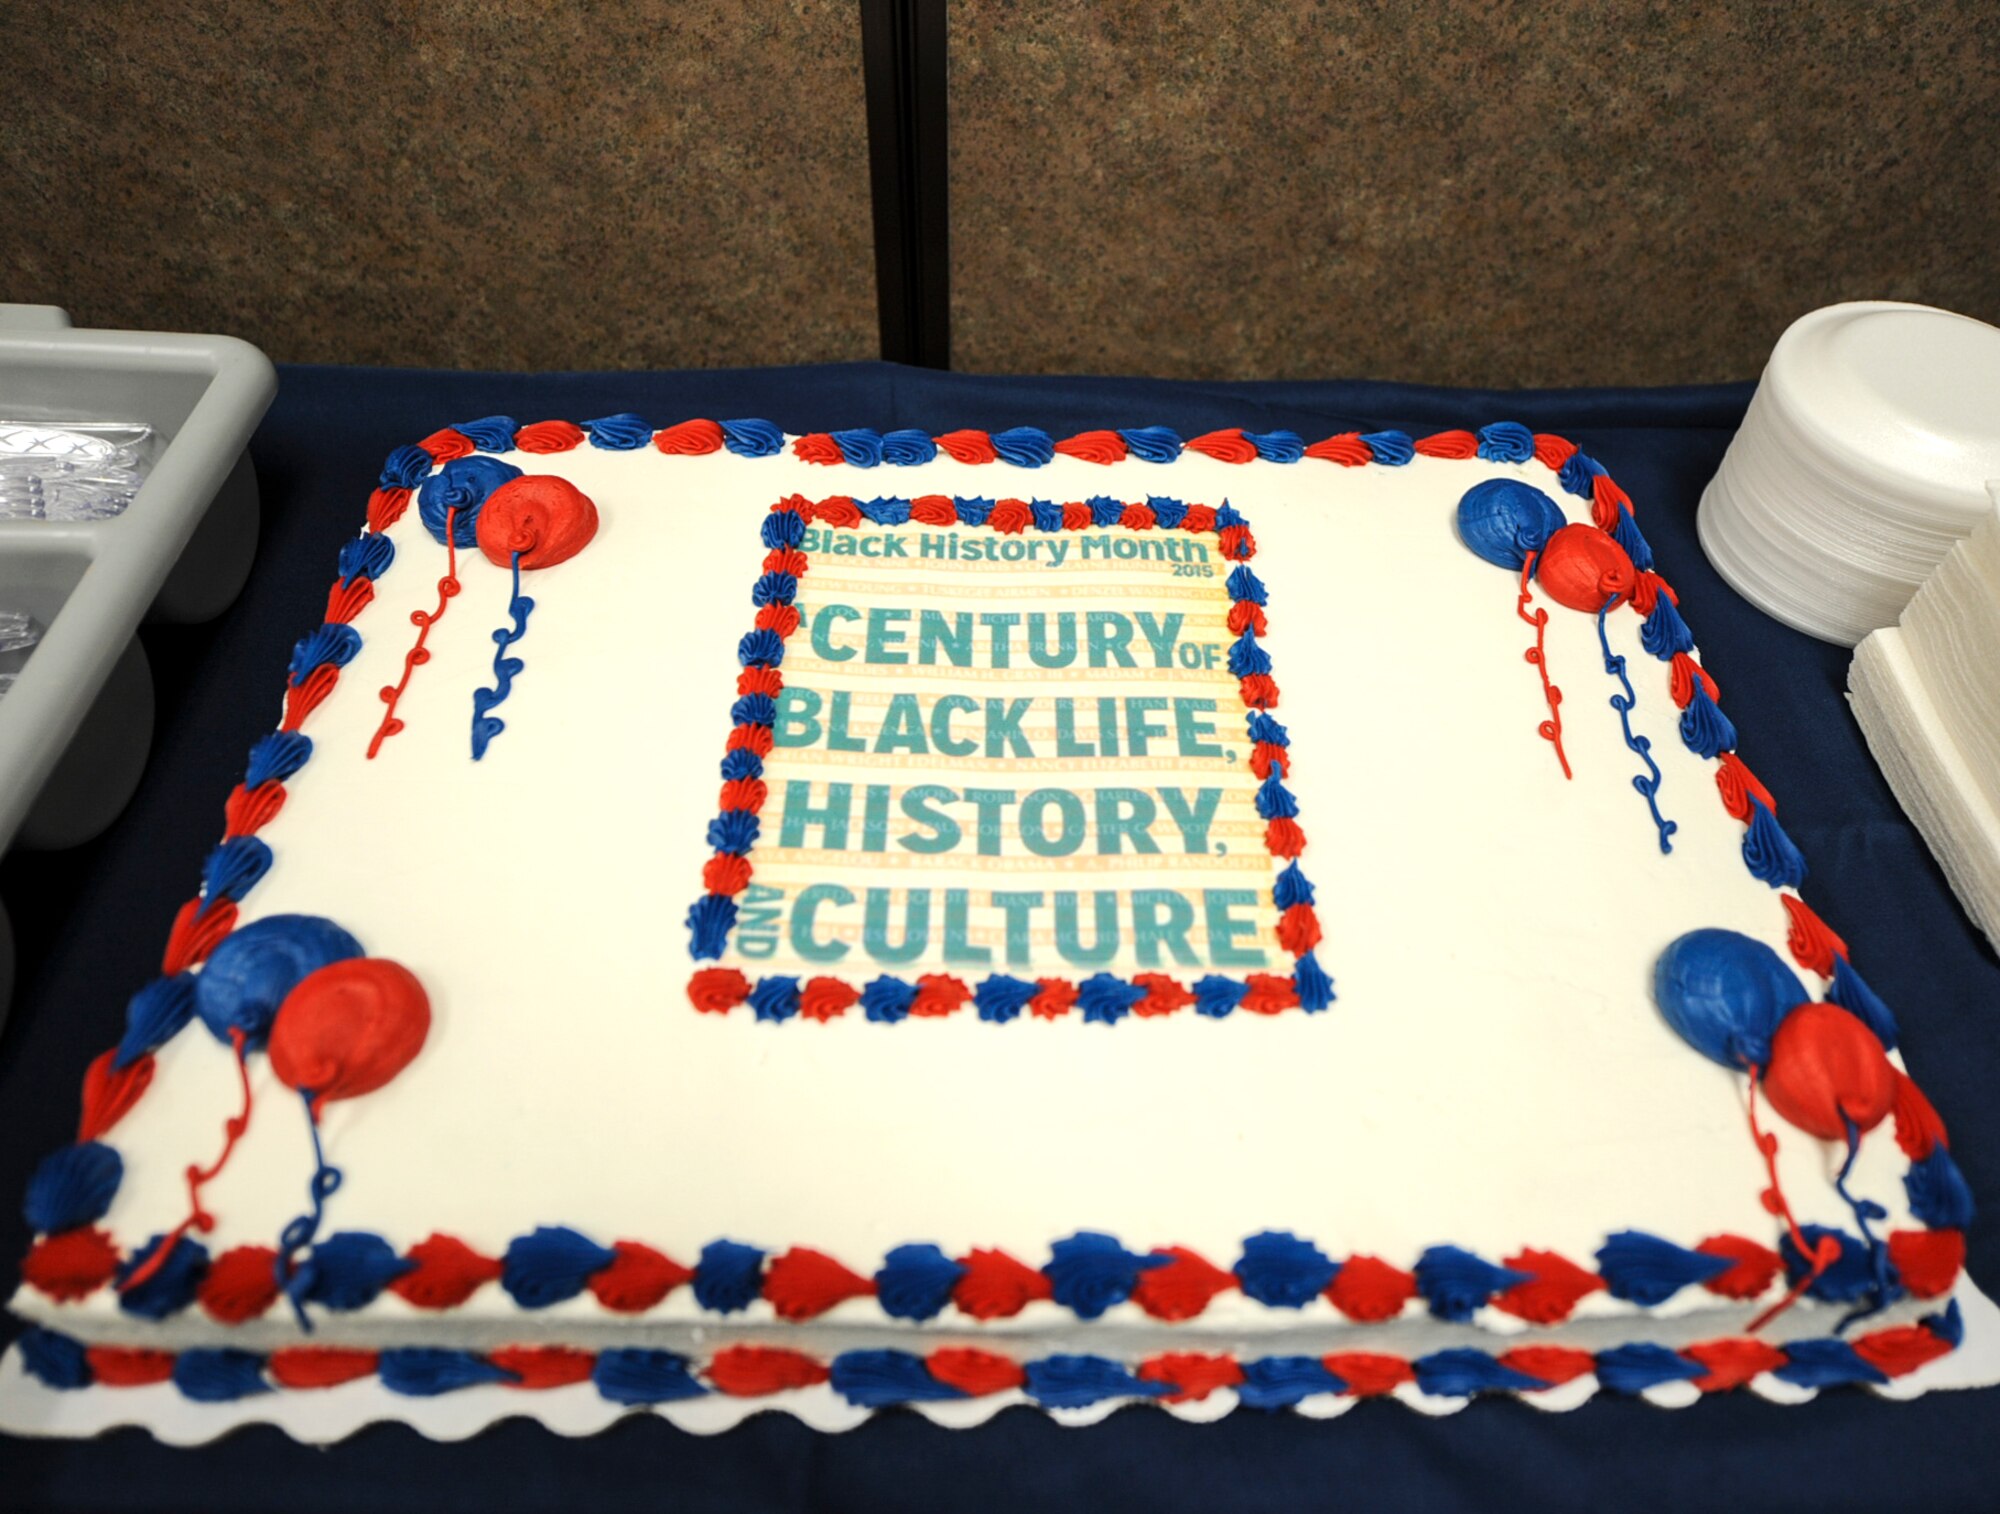 A Black History Month themed cake rests on a table during the Black History Month luncheon Feb. 27, 2015, at Moody Air Force Base, Ga. This year’s theme was “A Century of Black Life, History and Culture.” (U.S. Air Force photo by Senior Airman Olivia Bumpers/Released)